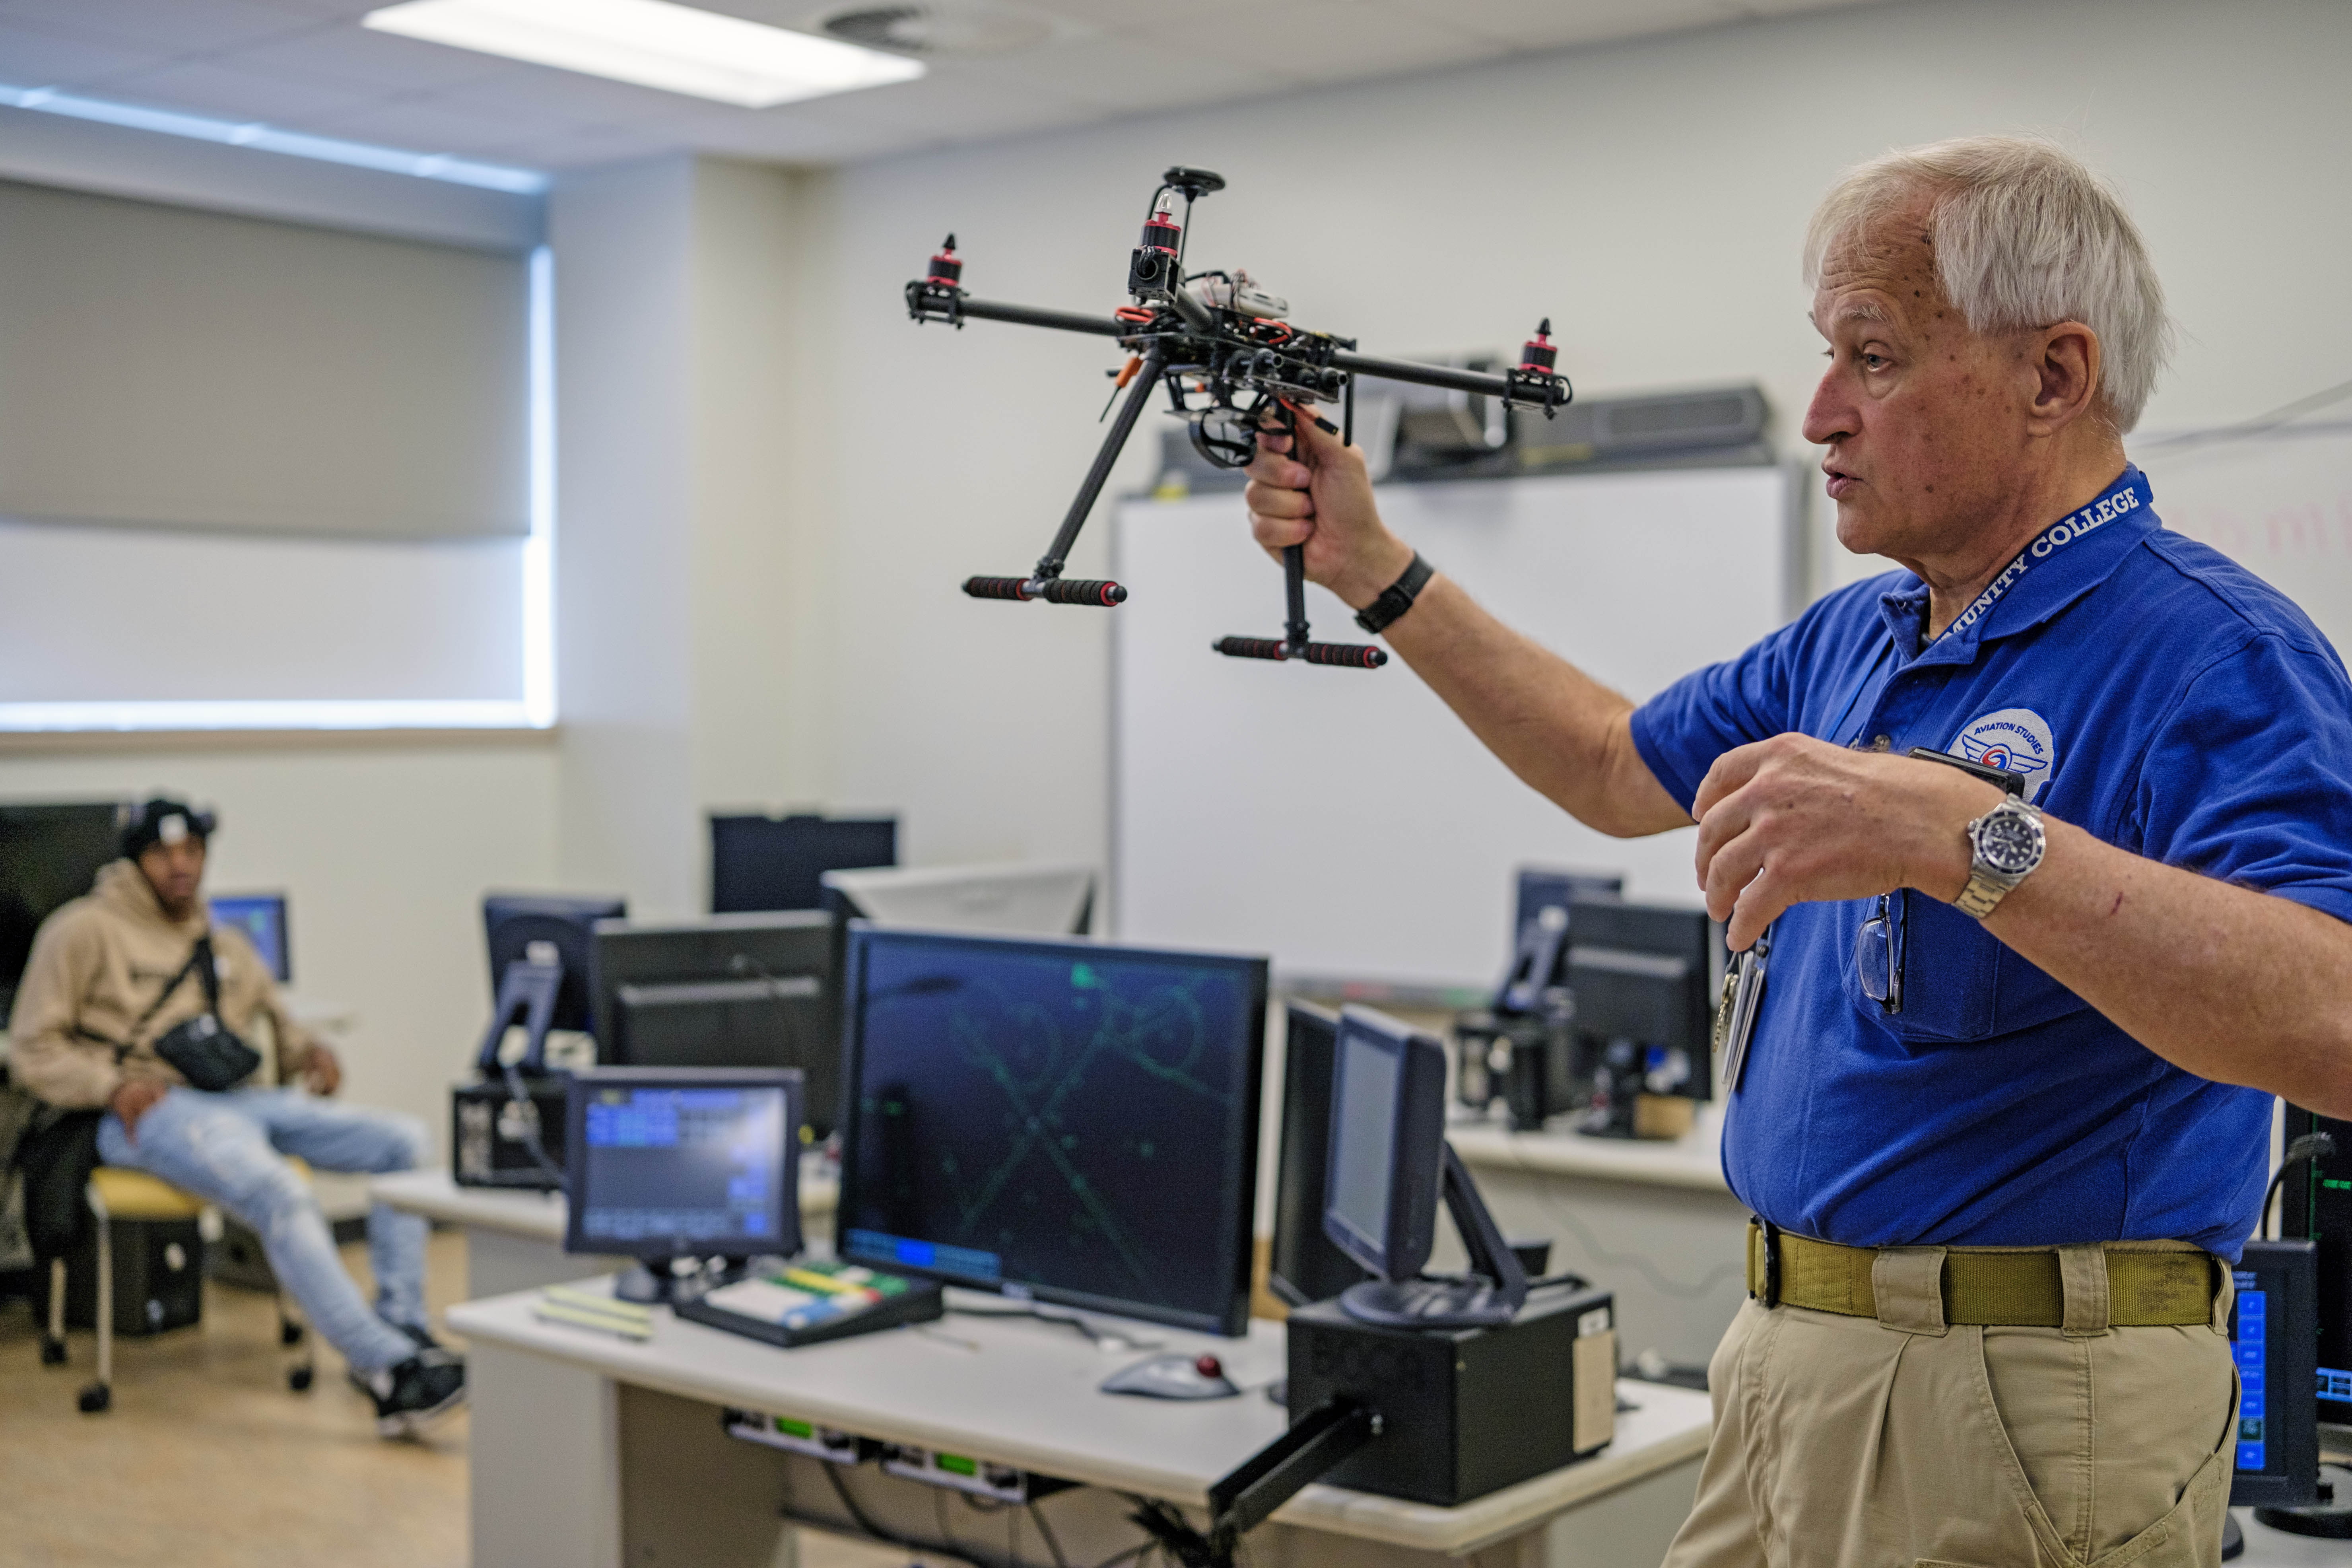 Professor Tim Cwik demonstrates the capabilities of a drone